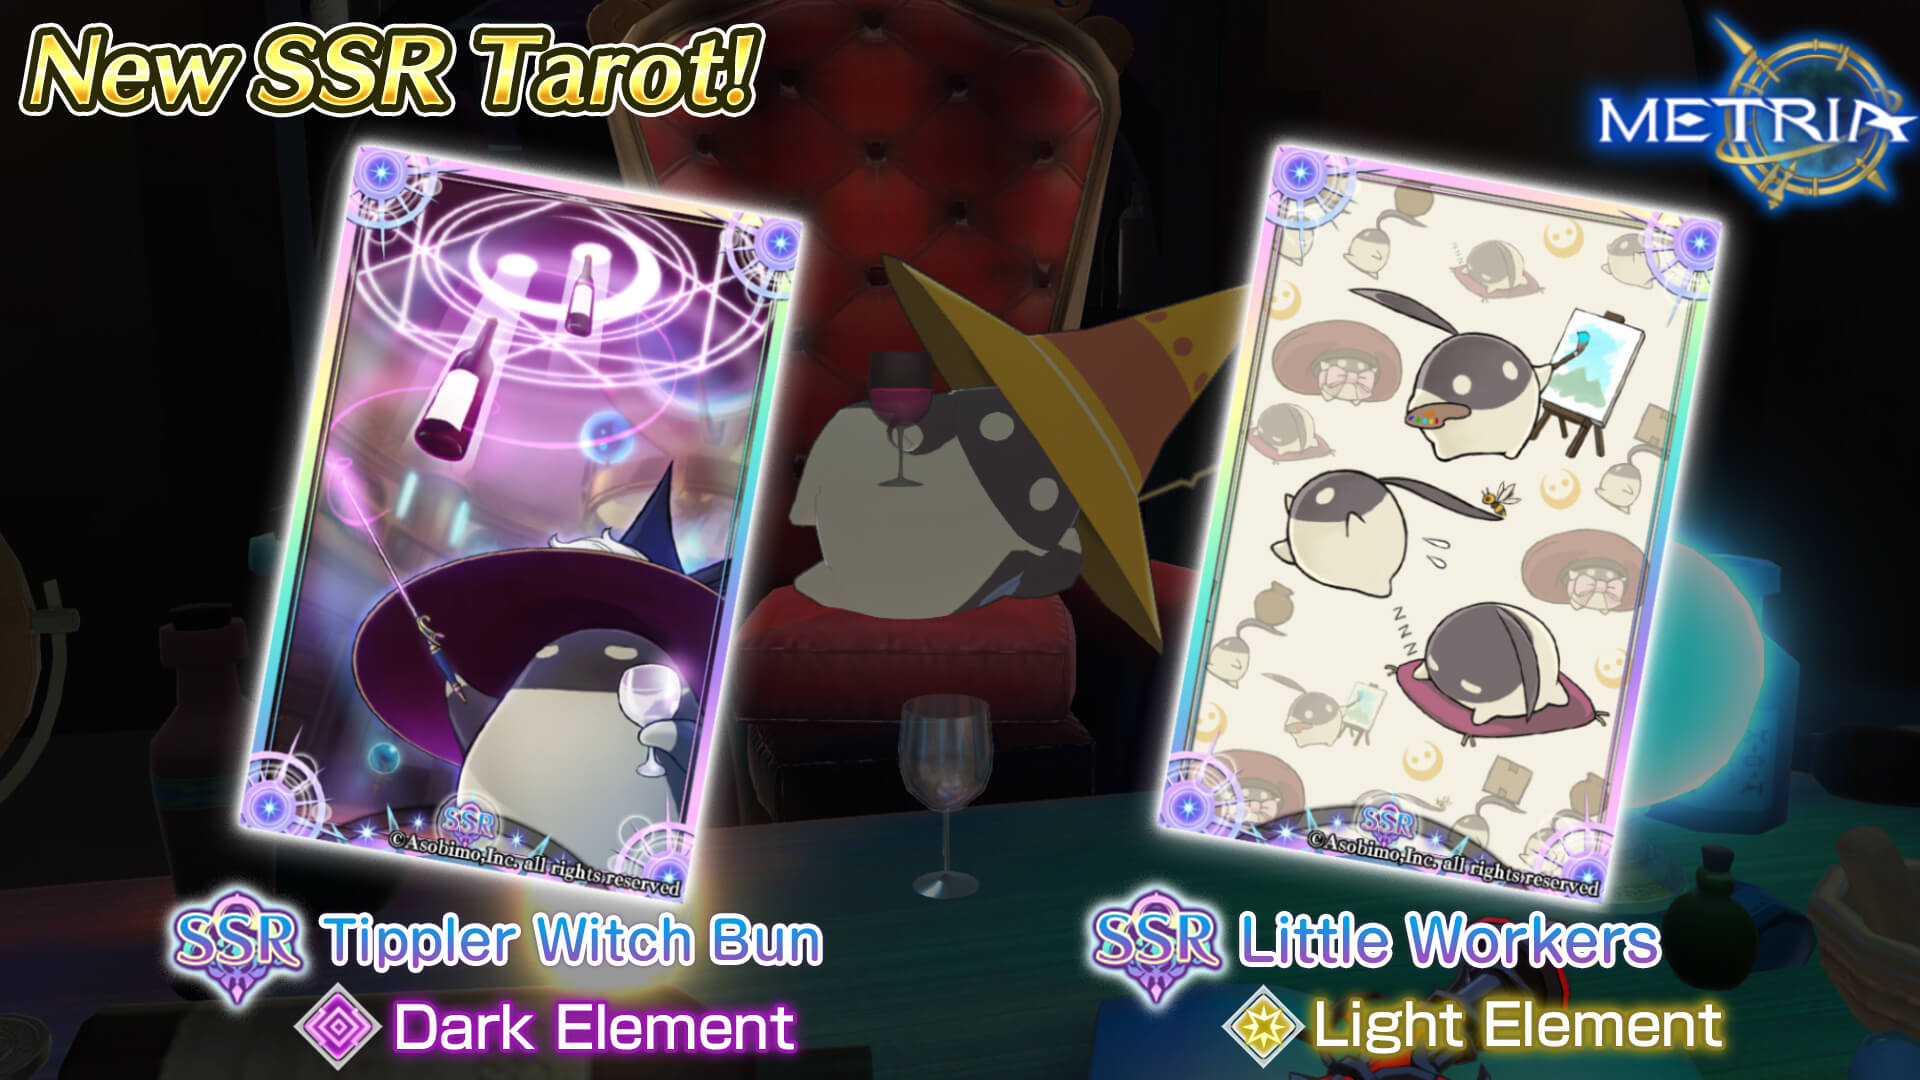 New SSR Tarot: "Tippler Witch Bun" and "Little Workers" Available for Purchase!